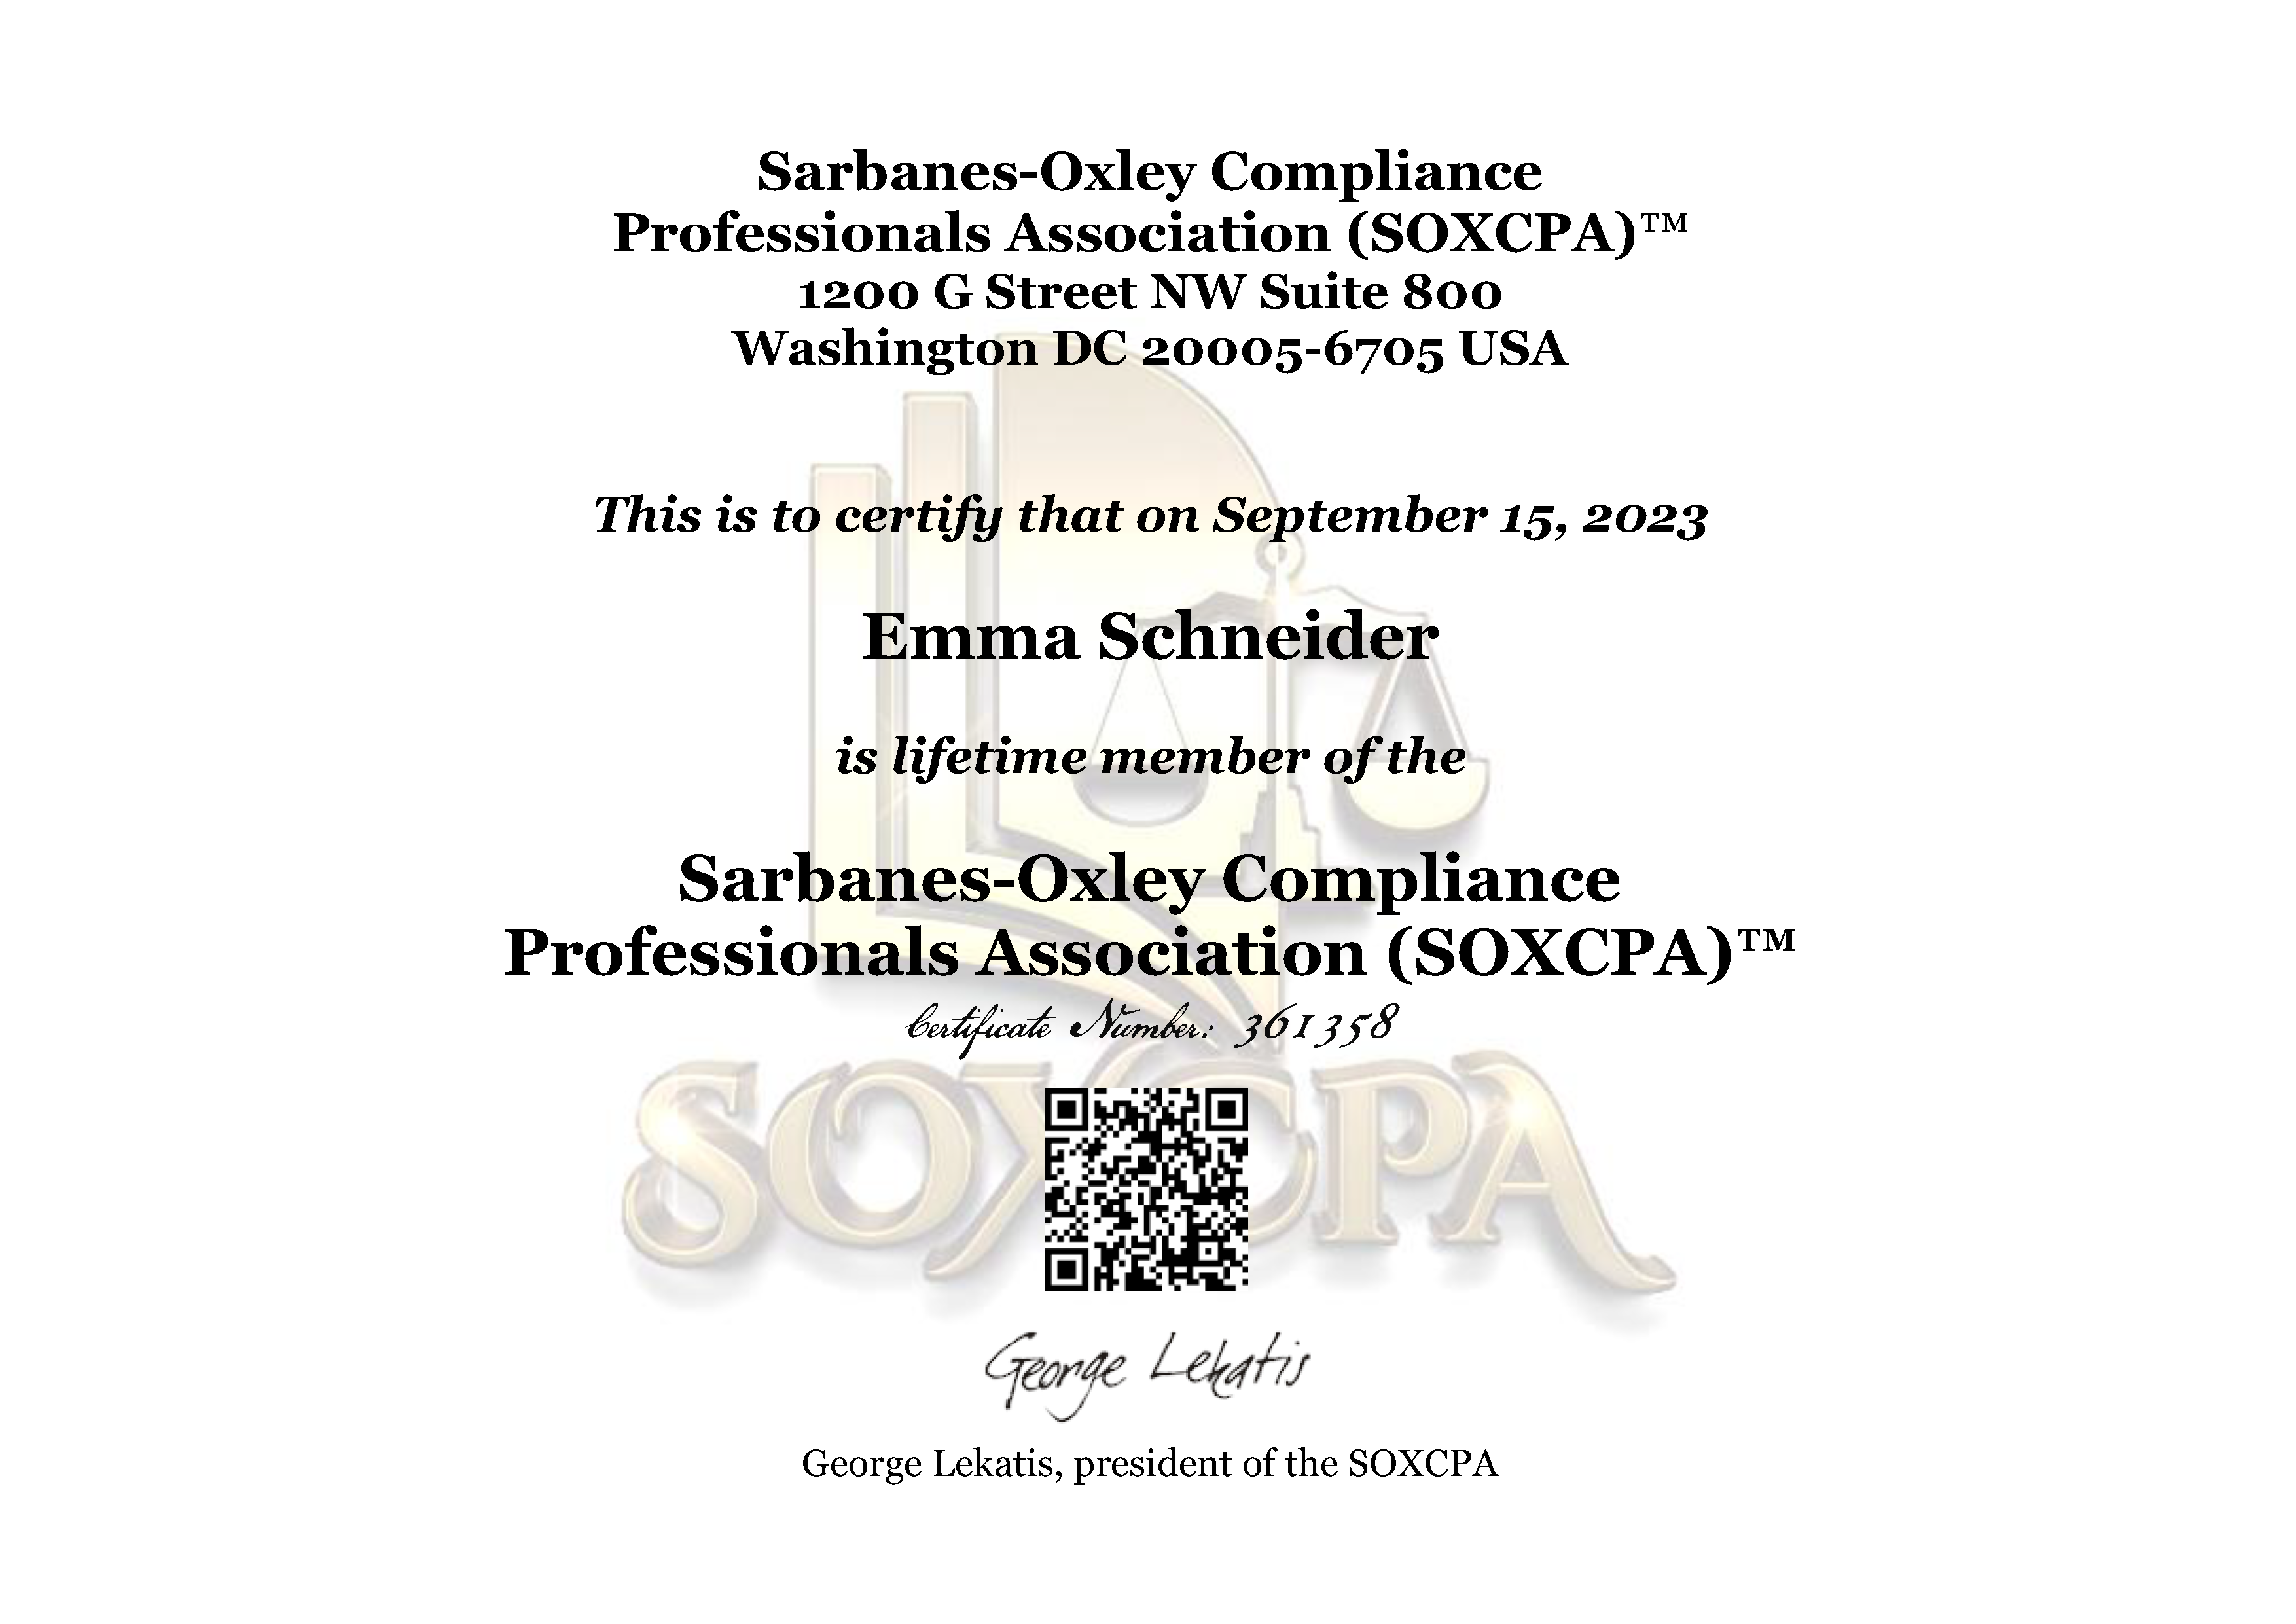 Lifetime Member of the Sarbanes-Oxley Compliance Professionals Association (SOXCPA)